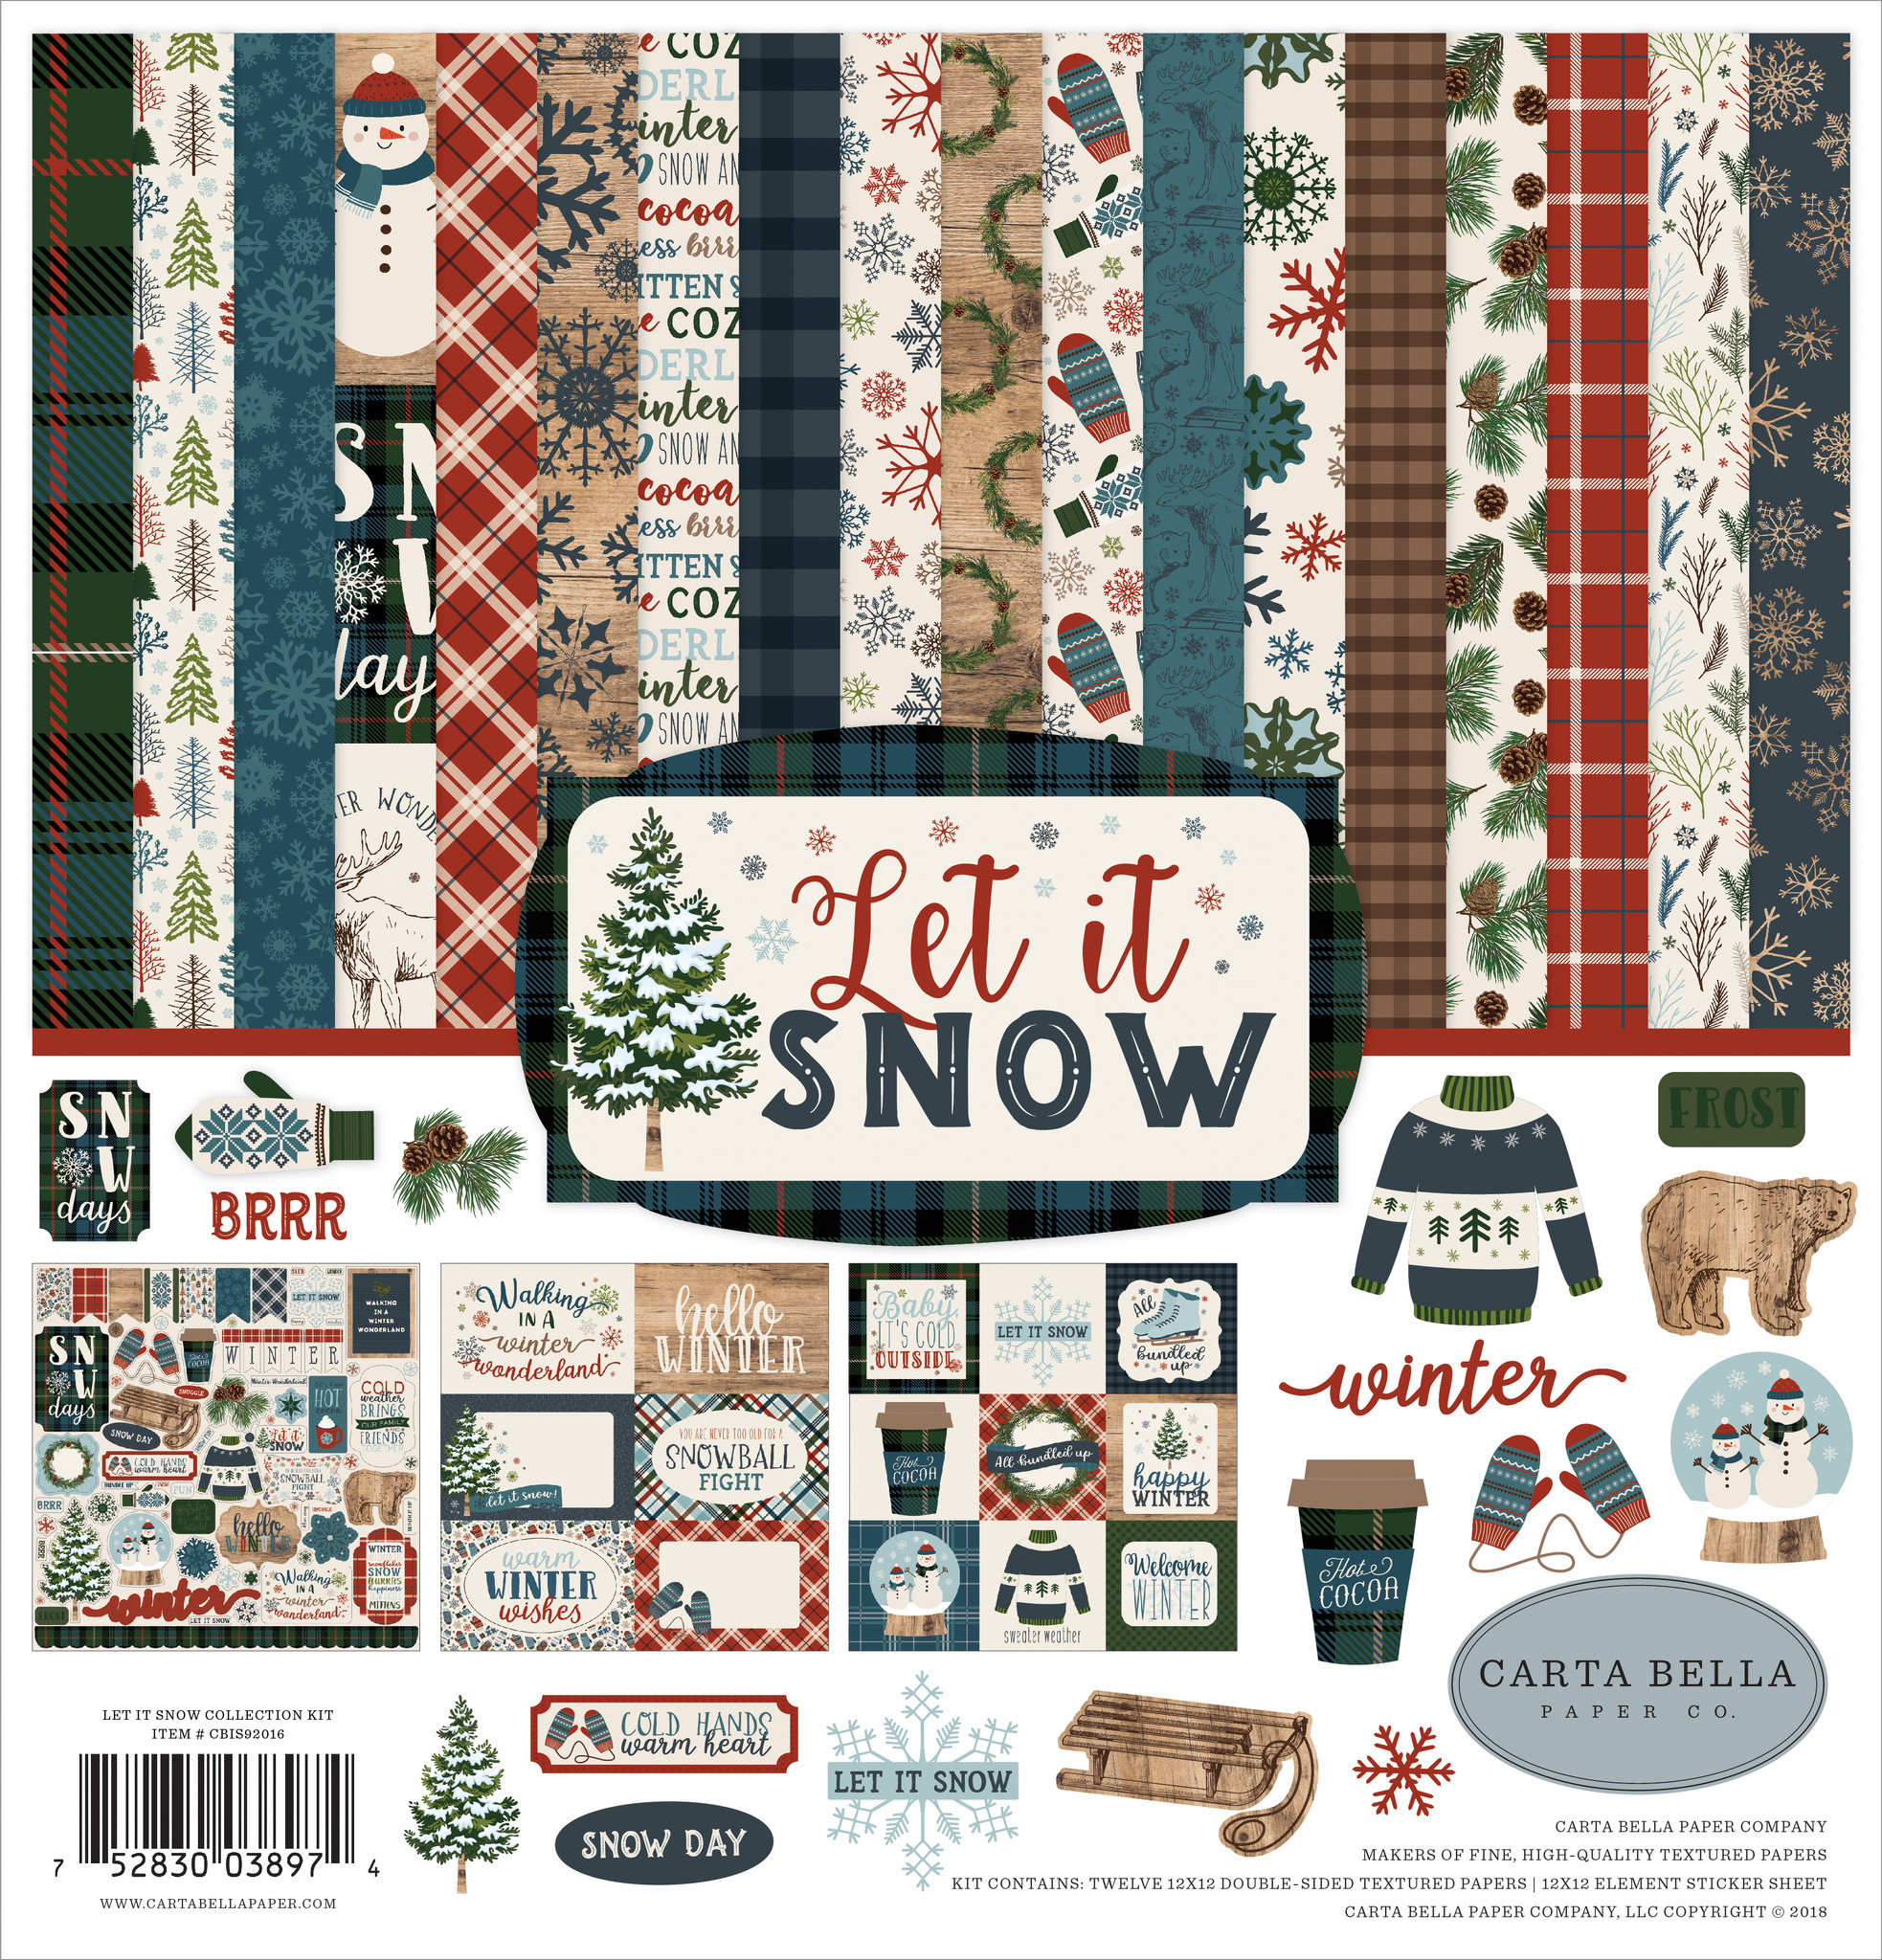 Let It Snow Stickers - 2 Sheets